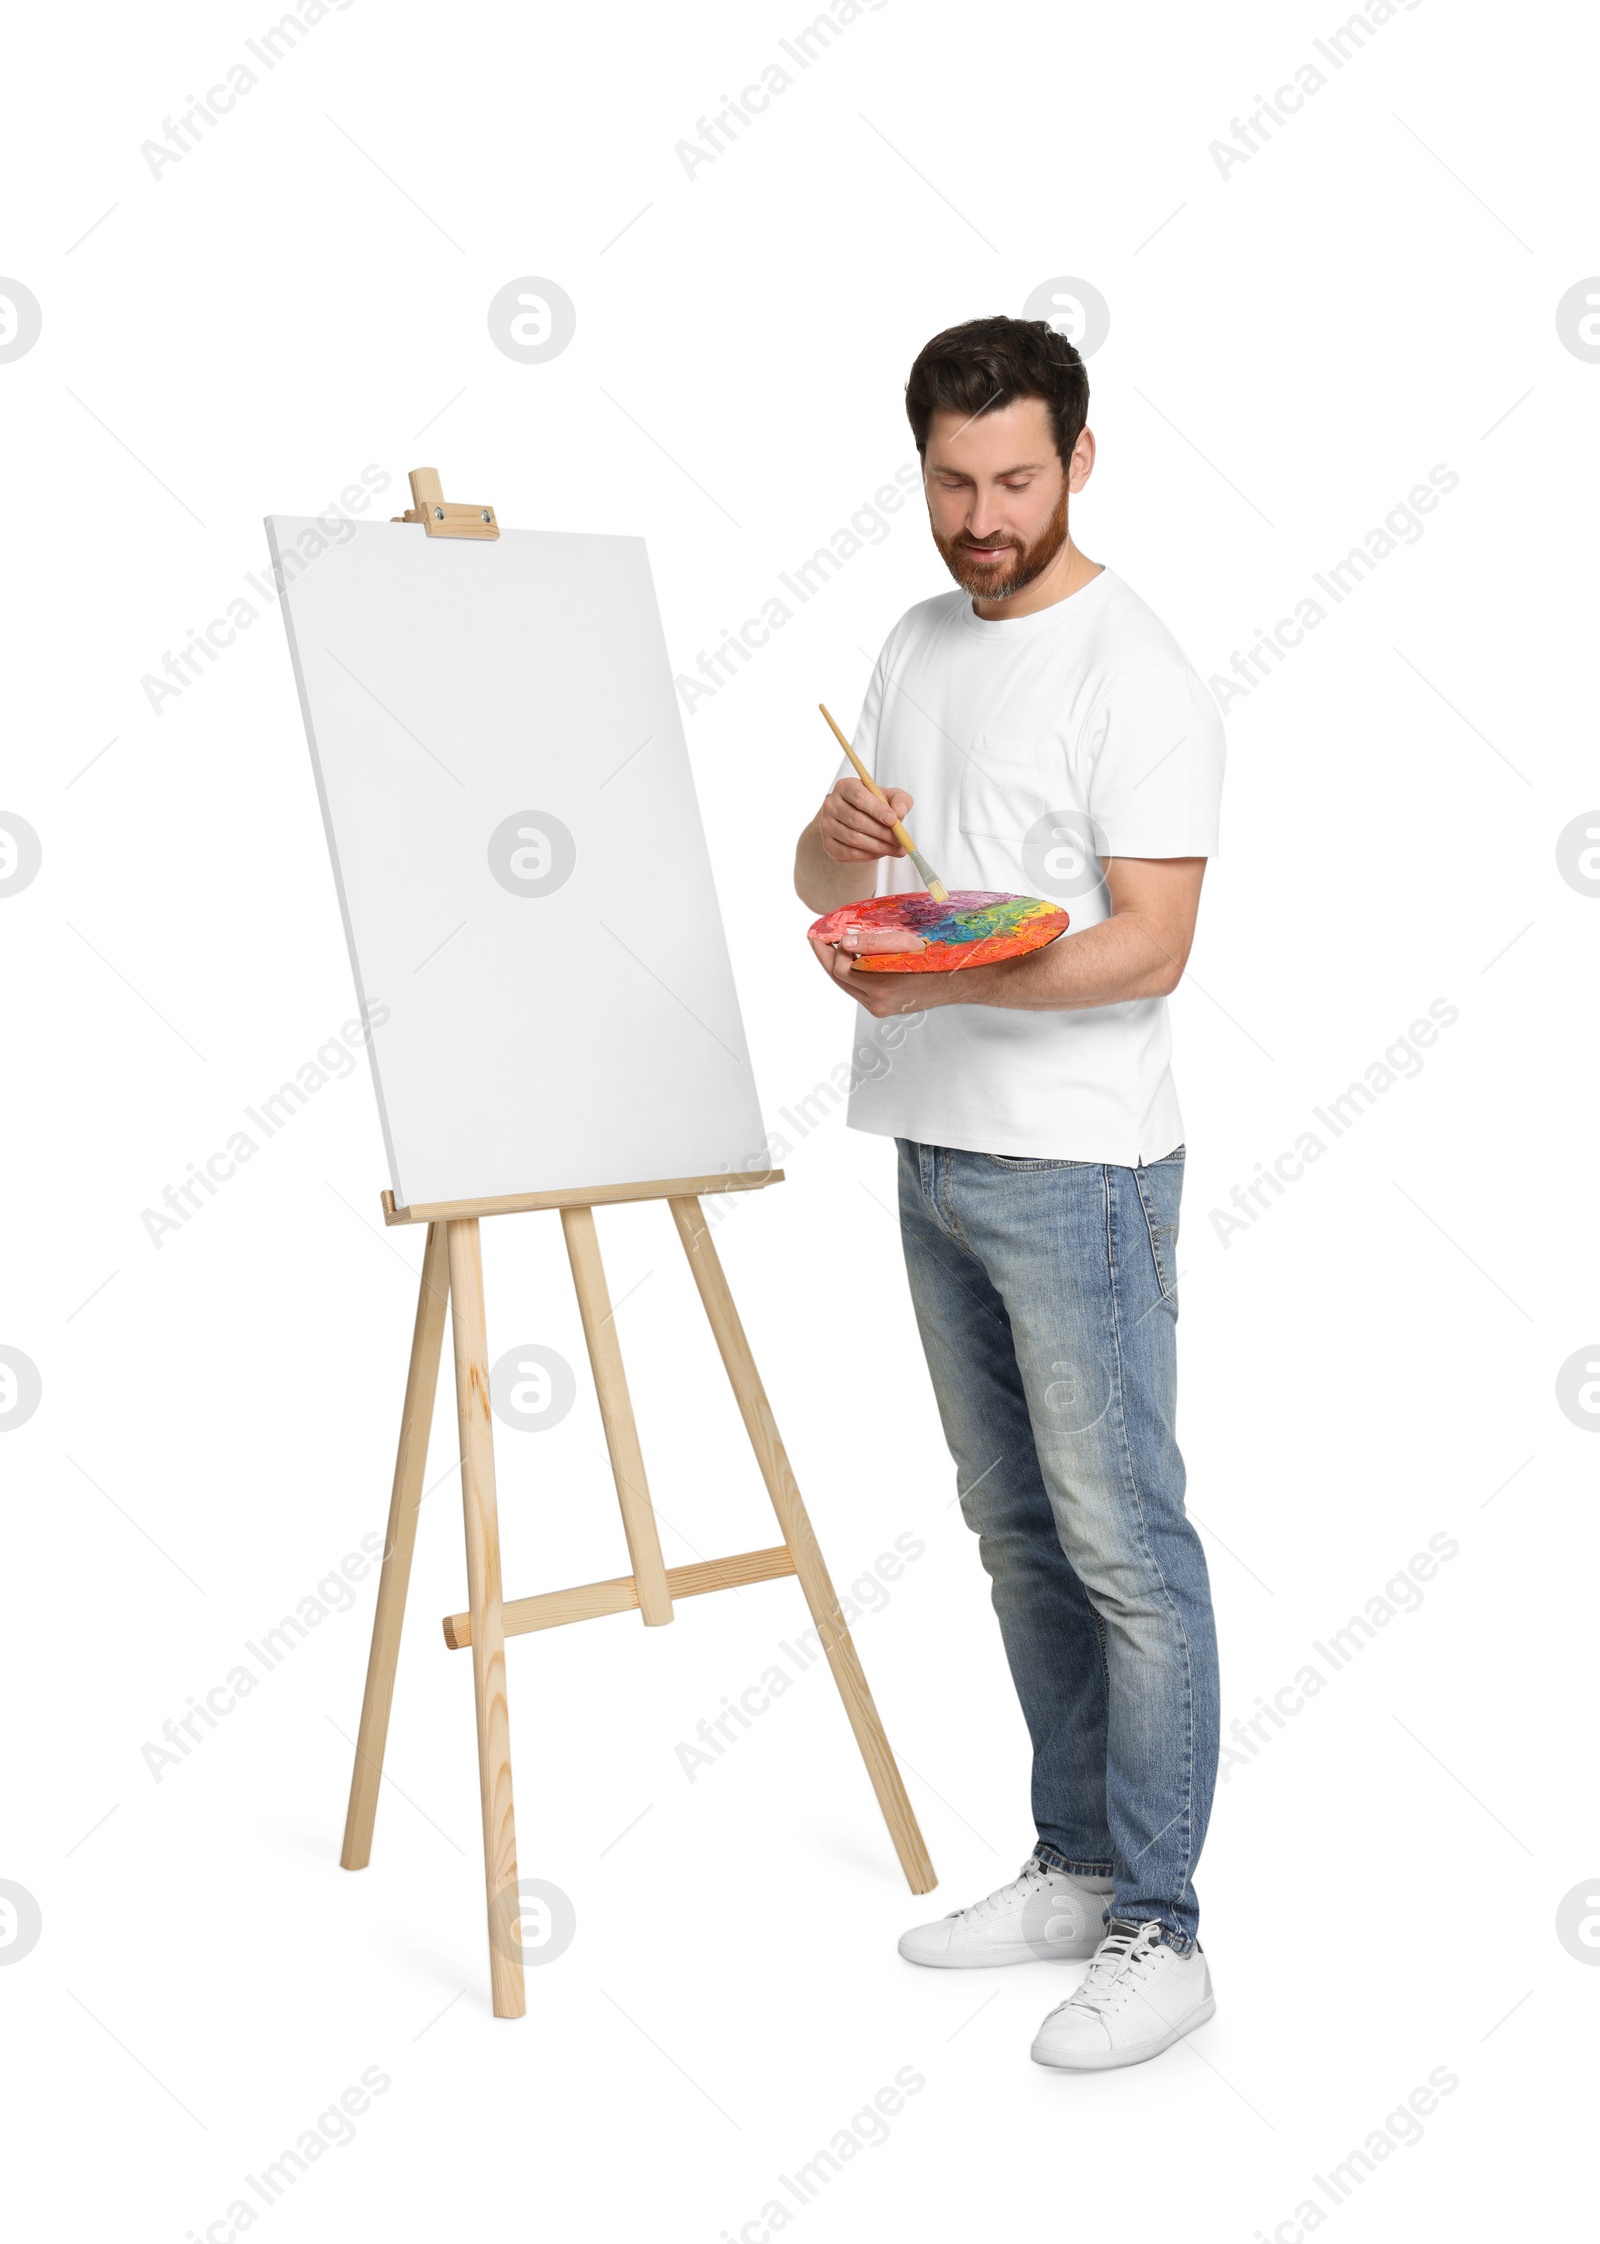 Photo of Man with brush and artist`s palette painting against white background. Using easel to hold canvas